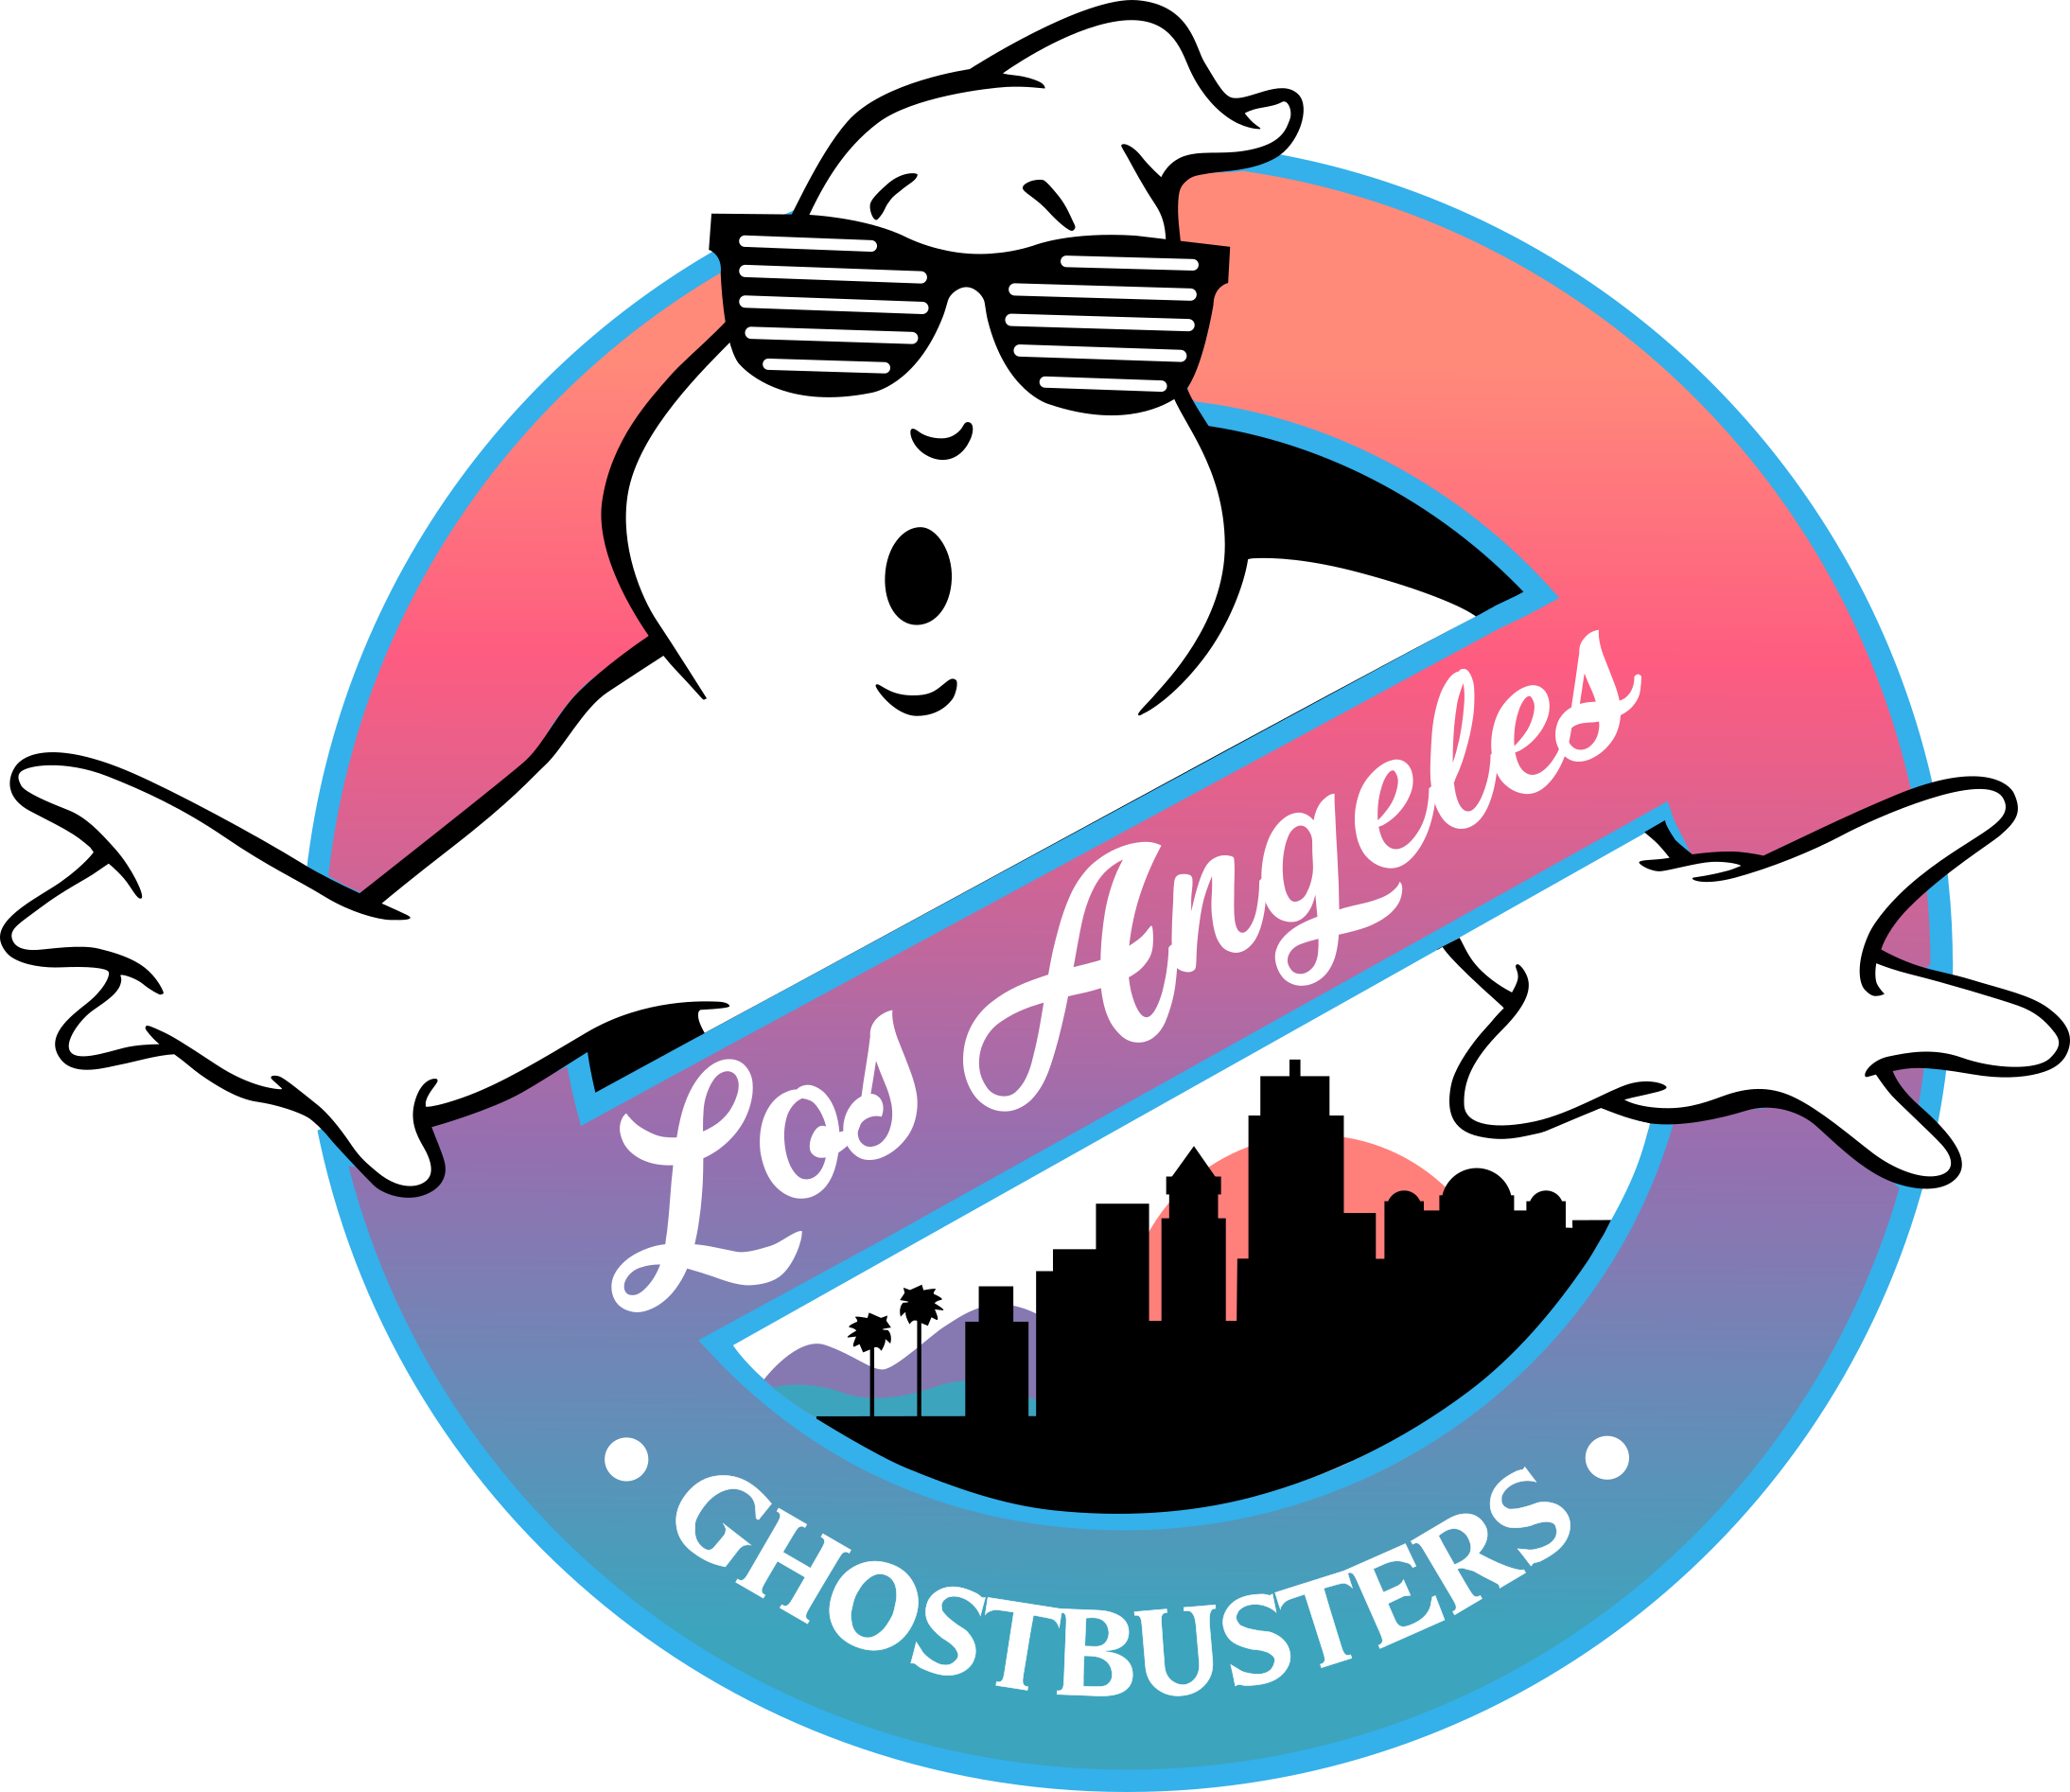 Ghostbusters PNG Image File